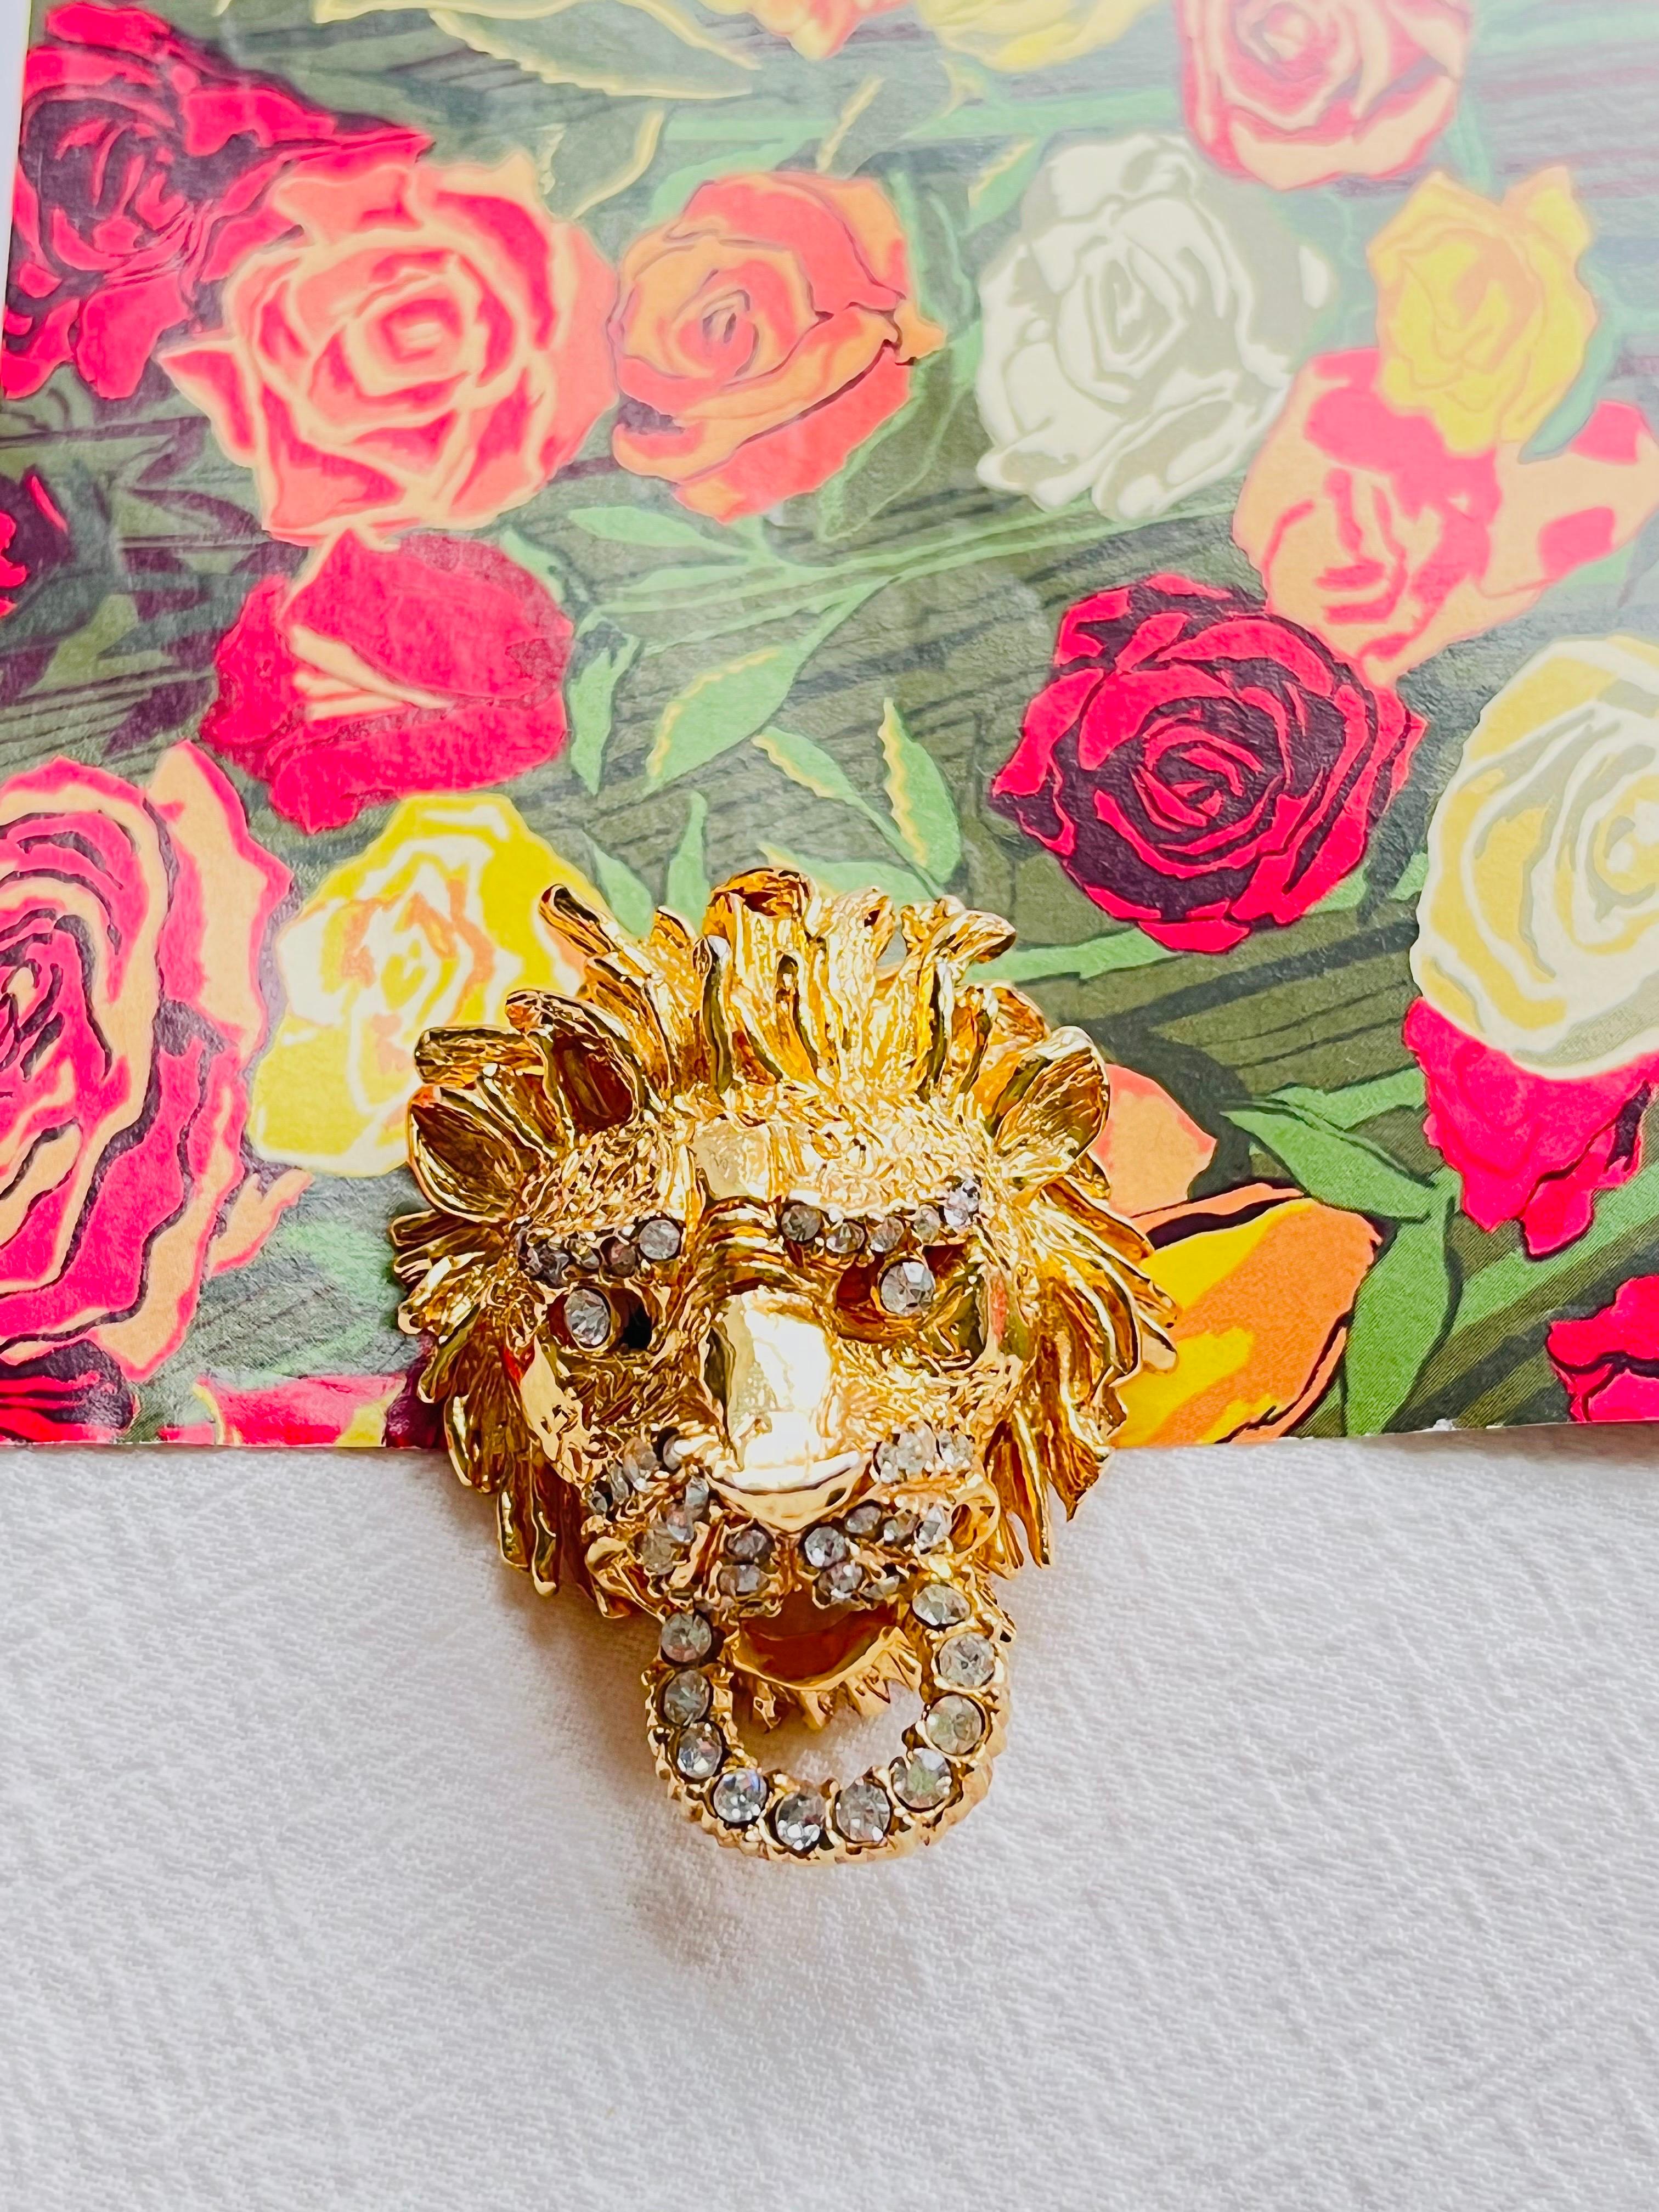 Christian Dior GROSSE 1967 Vintage Vivid 3D Lion Head Knocker Crystals Dome Chunky Brooch, Gold Tone

Very good condition, very light scratches or colour loss, barely noticeable. 100% Genuine.

Safety-catch pin closure. Signed Grosse 1967 on the